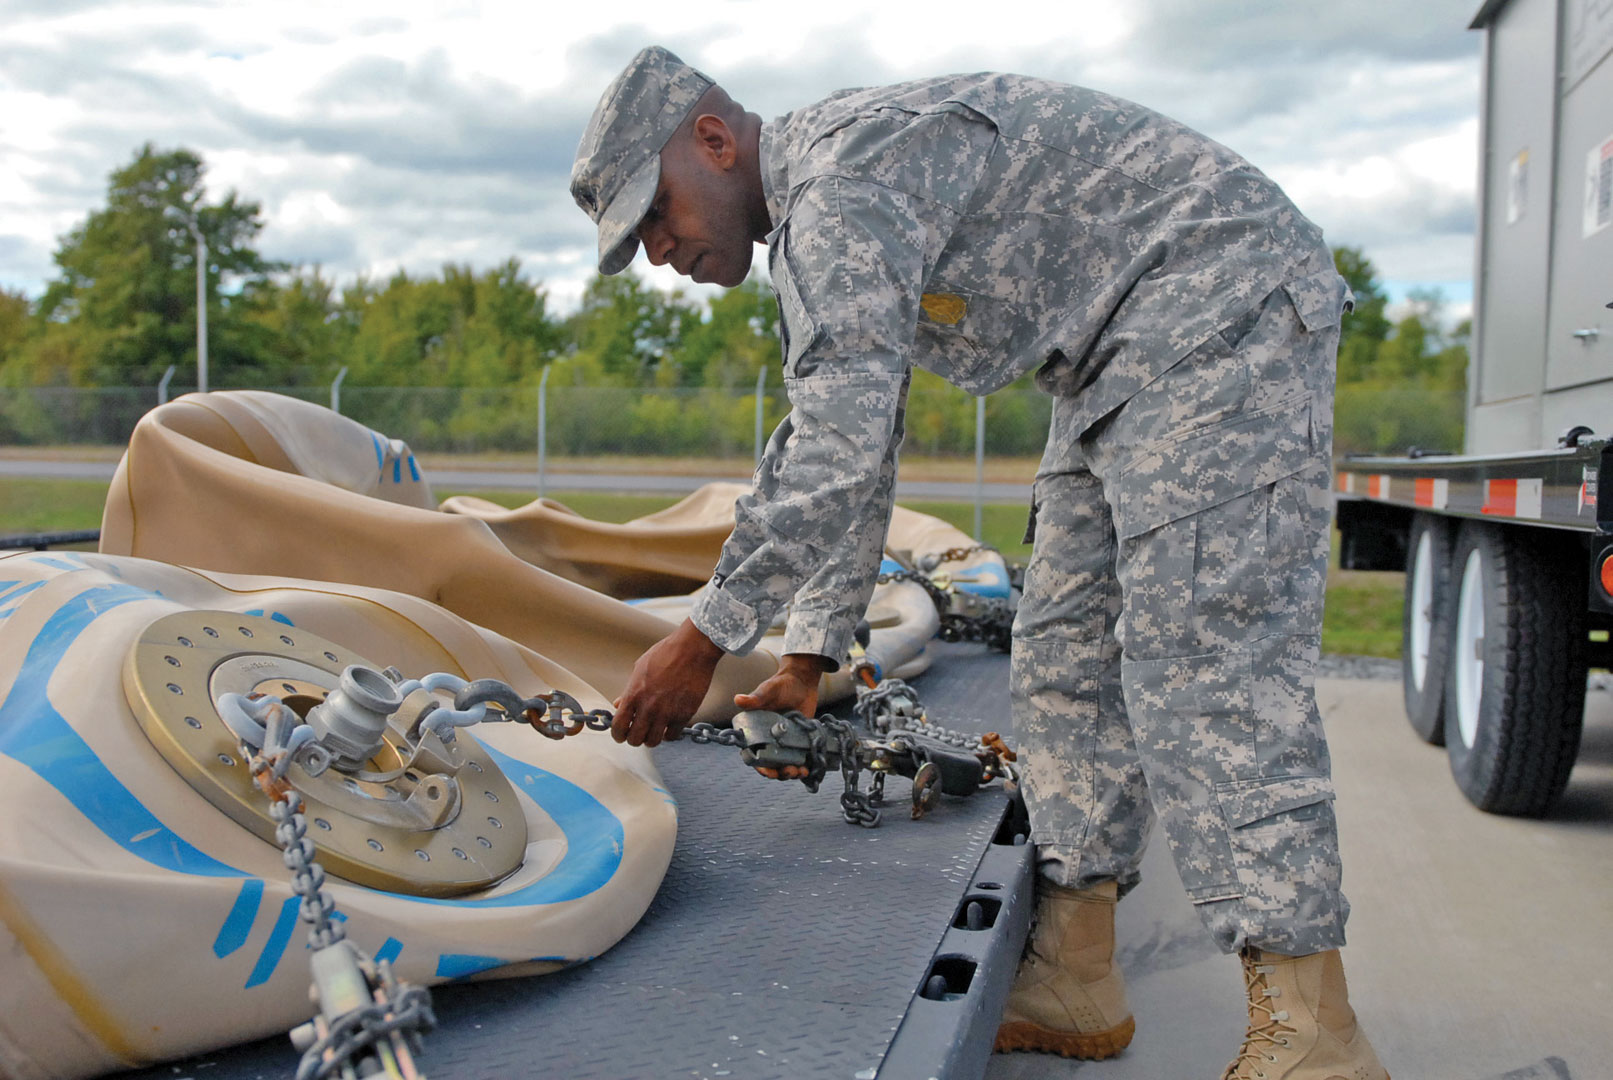 Staff Sgt. Andrew Dugger, a water treatment specialist assigned to A Company, 210th Brigade Support Battalion, 2nd Brigade Combat Team, 10th Mountain Division, inspects the tie down chains for potable water blivets Sept. 10 at Fort Drum, N.Y. (Photo by Spc. Candace Foster)